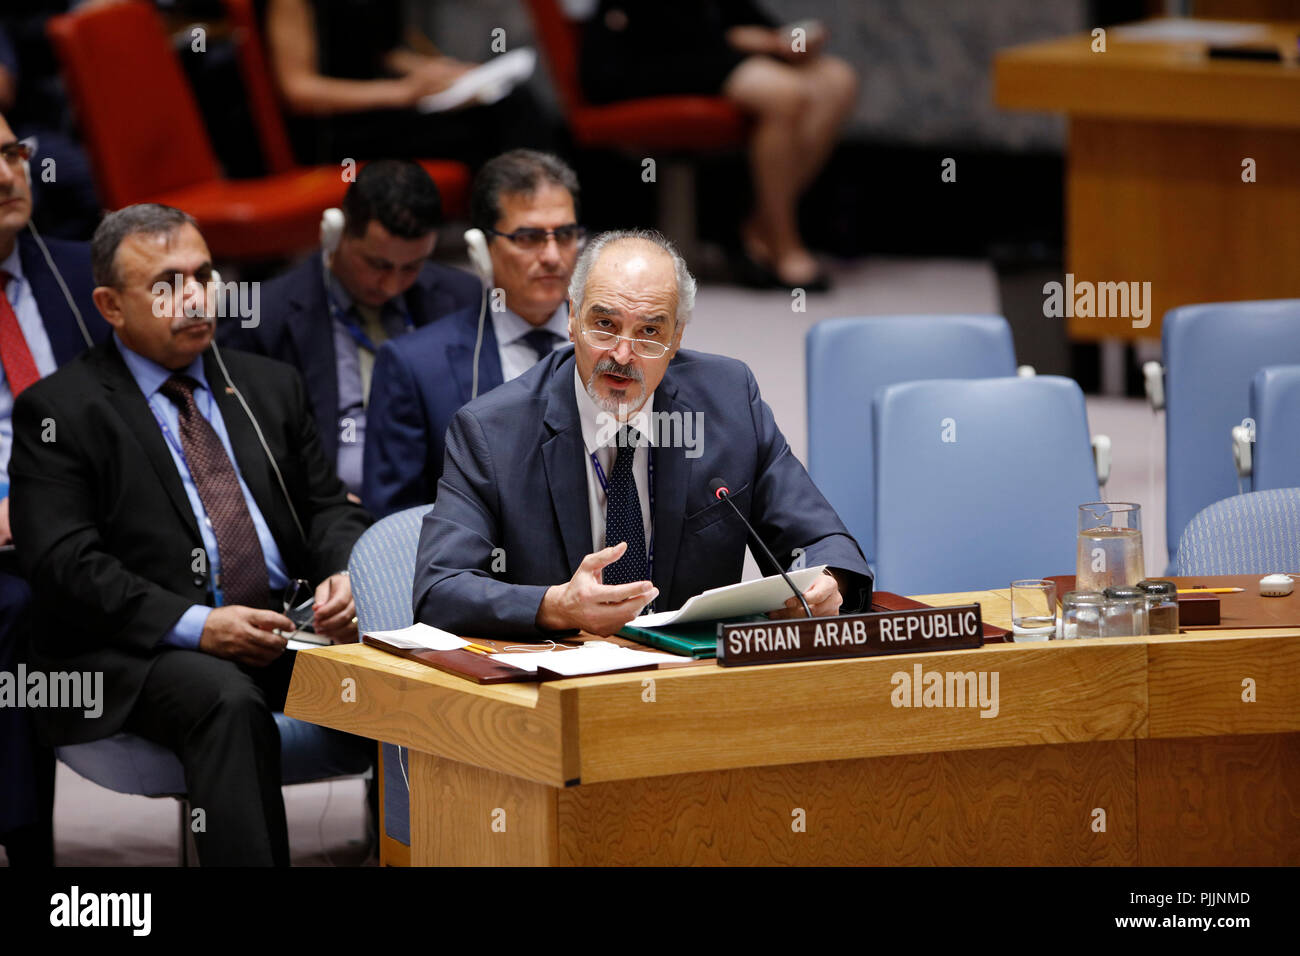 New York, USA. 7th September 2018.  Syrian Ambassador to the United Nations Bashar Ja'afari (front) speaks at a Security Council meeting on the situation in Idlib at the UN headquarters in New York, Sept. 7, 2018. The UN special envoy for Syria said Friday that the situation there had all the "ingredients" for a "perfect storm" with devastating humanitarian consequences, urging all stakeholders to find a solution to avert a tragedy. Credit: Li Muzi/Xinhua/Alamy Live News Stock Photo